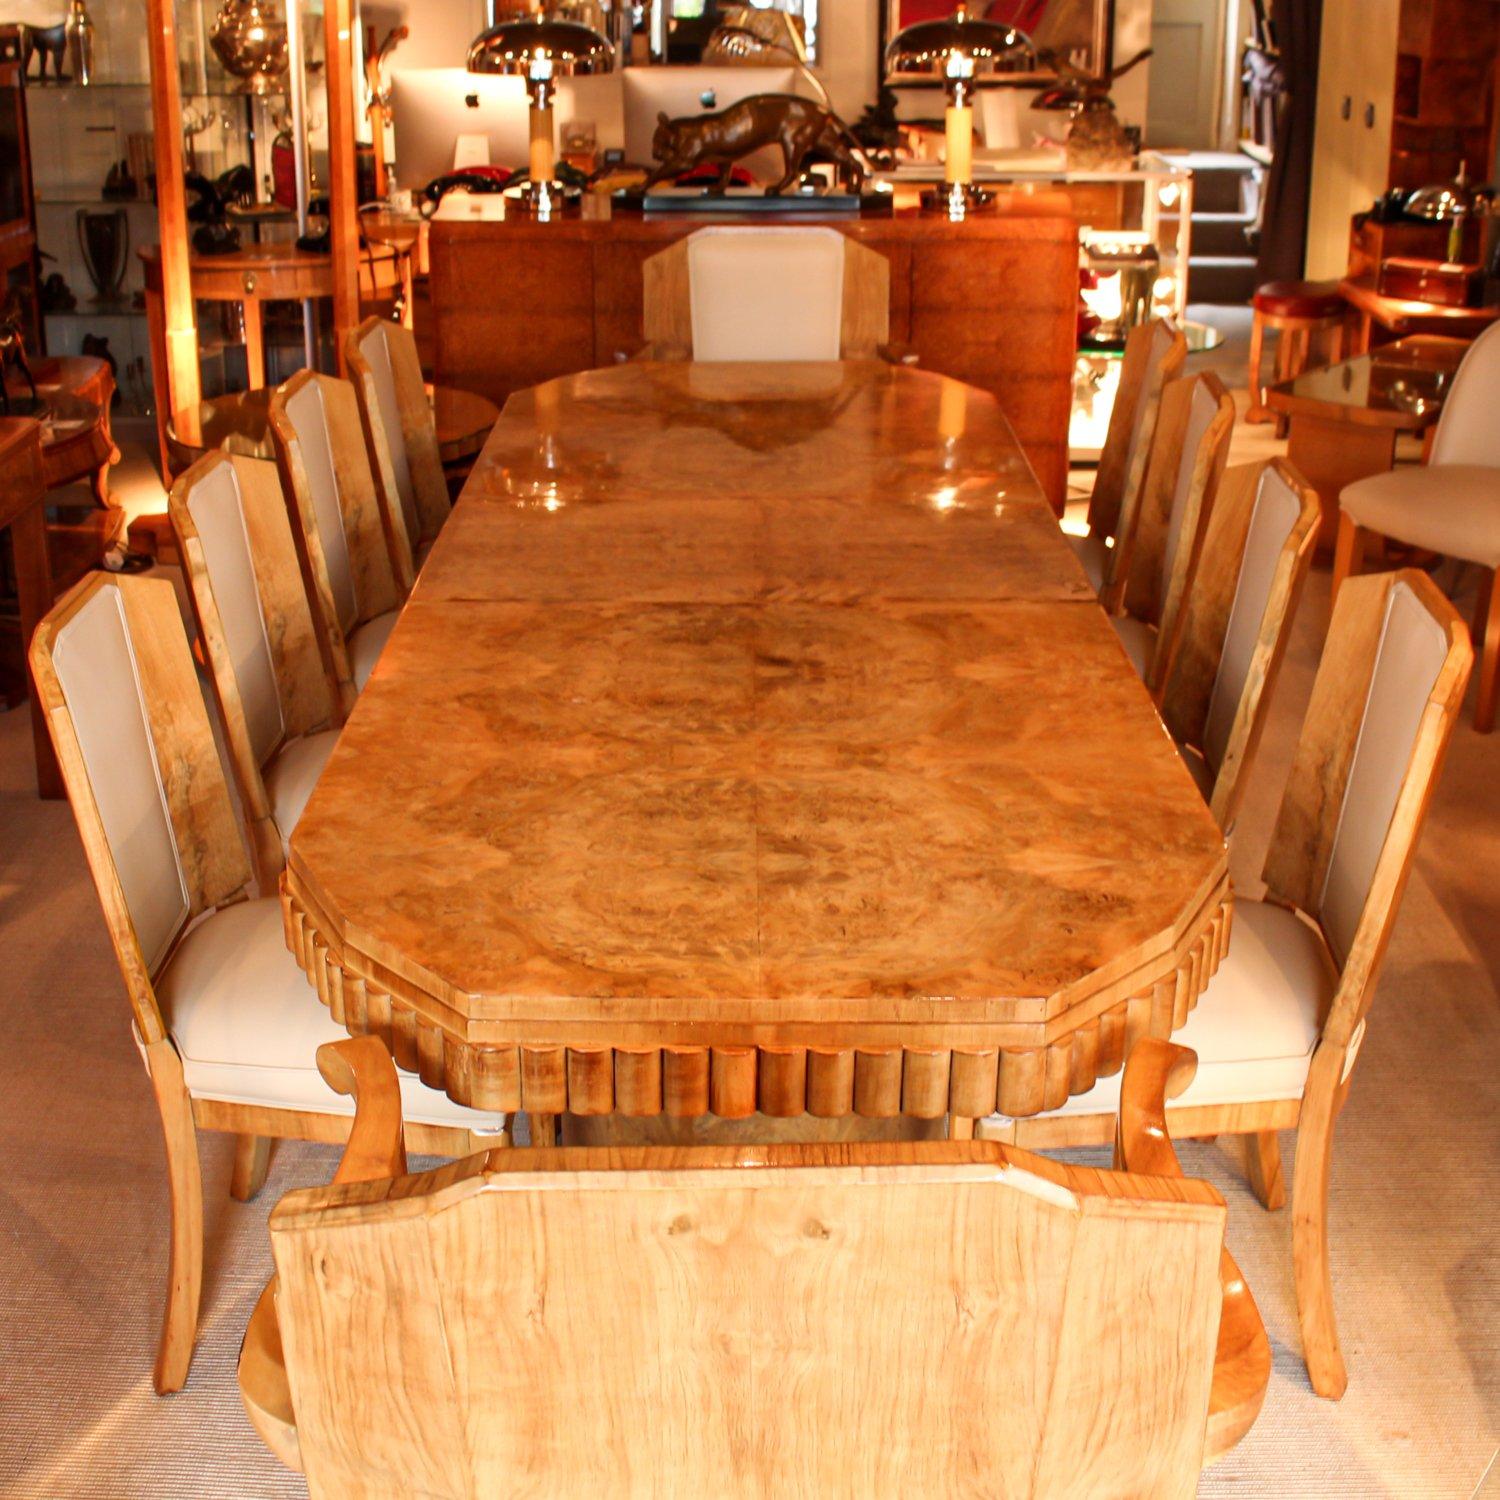 An Art Deco, walnut veneered dining table with ten chairs (eight chairs and two arm chairs) by Hille. Refurbished, re-polished and re-upholstered in cream leather.

Dimensions: H 78cm L 265cm W95cm
Armchair Seat W 66cm, seat D 50cm, seat H 46cm,